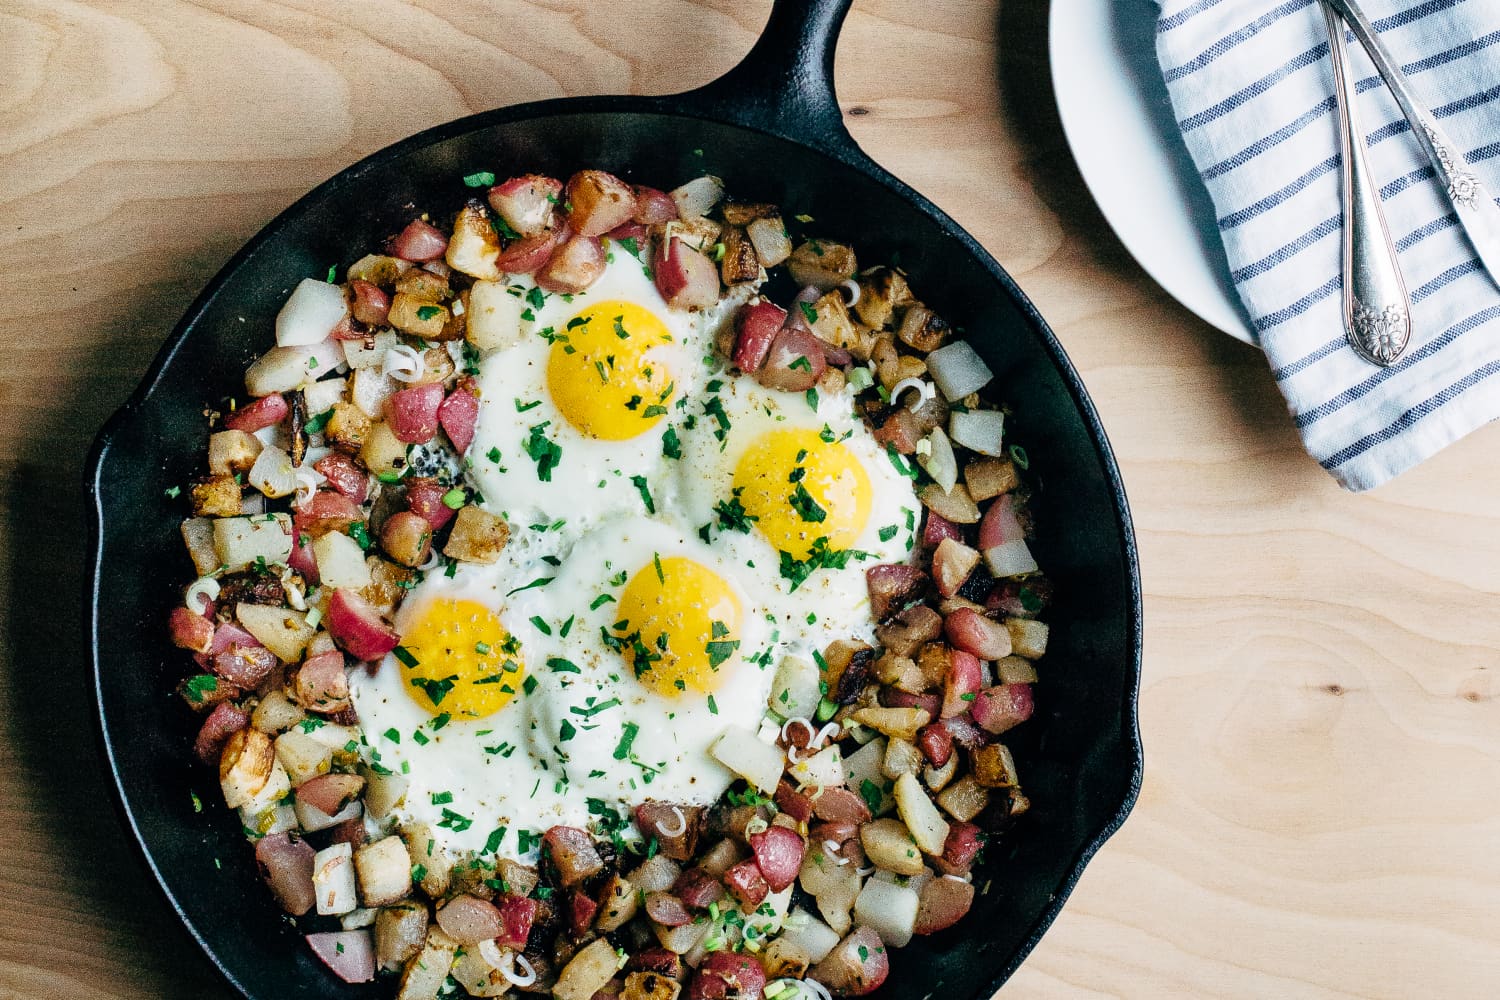 Lodge Giving Away Their Own 80 Layer Skillet : r/castiron